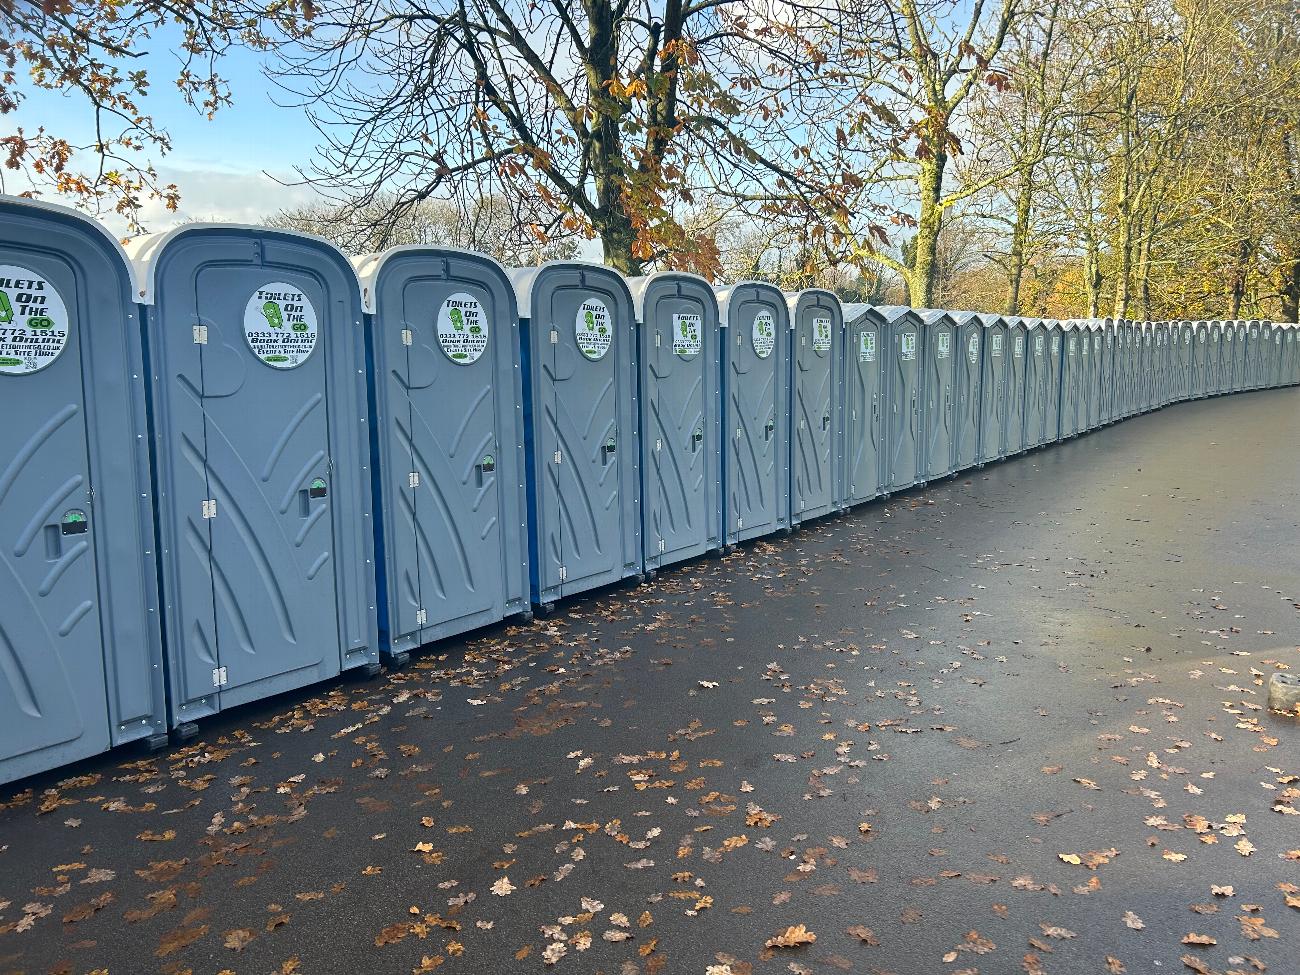 Gallery | Portable Toilet Loo Hire Rental Company in North West uk and Manchester gallery image 1